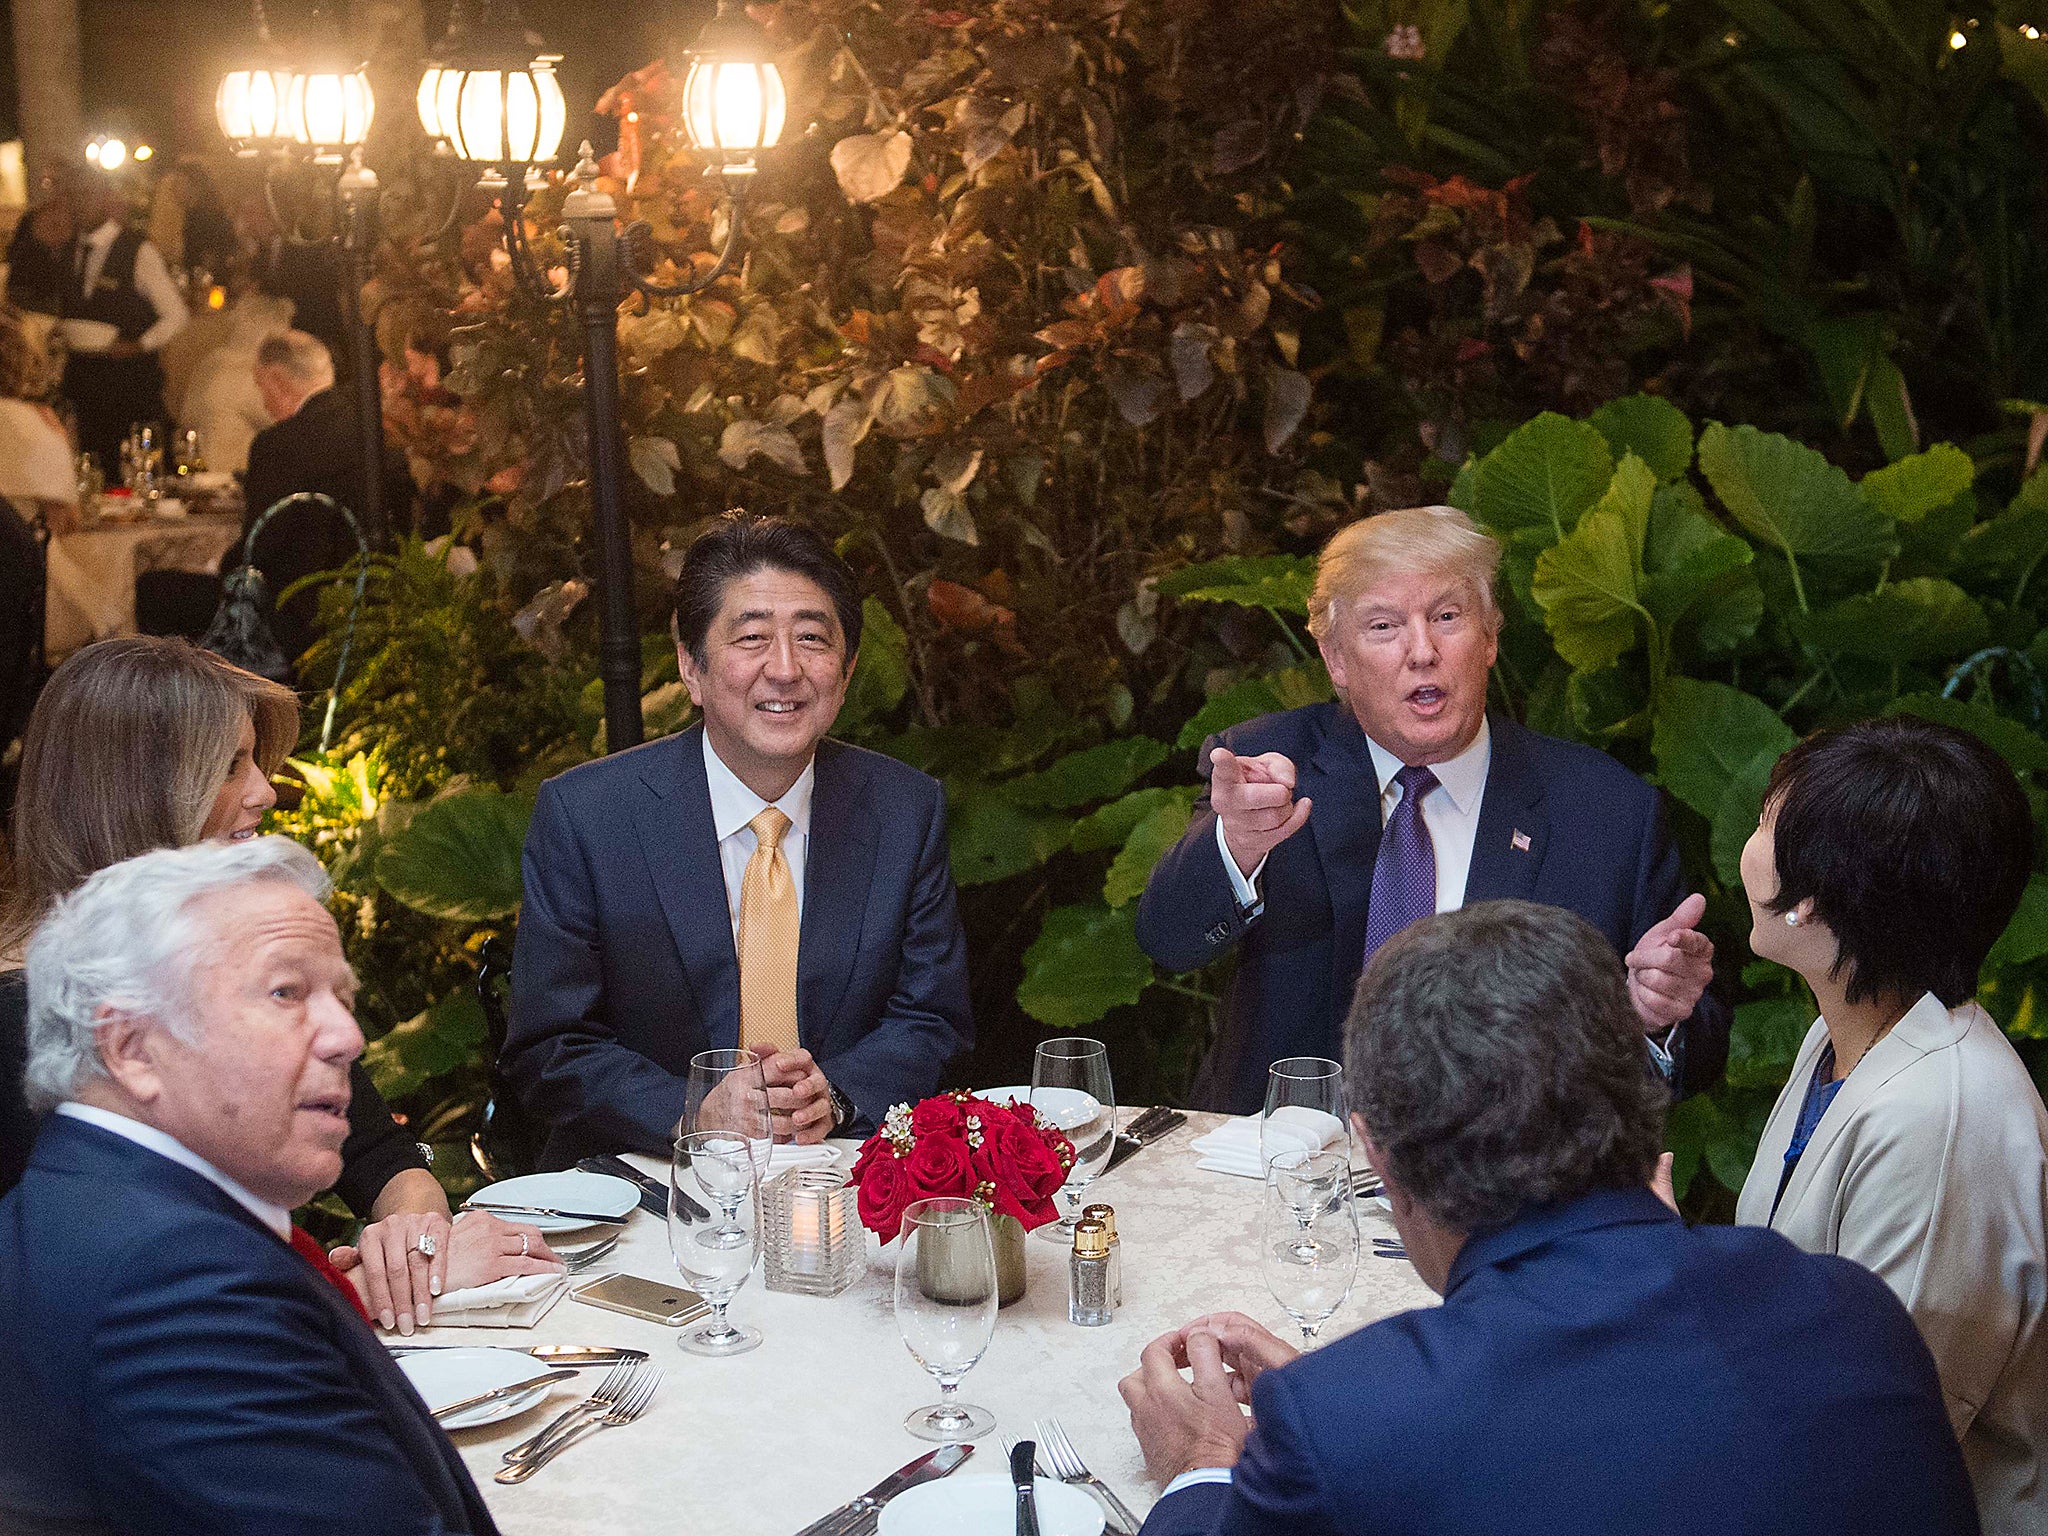 US President Donald Trump, Japanese Prime Minister Shinzo Abe, his wife Akie Abe, US First Lady Melania Trump and Robert Kraft ,owner of the New England Patriots, sit down for dinner at Trump's Mar-a-Lago resort